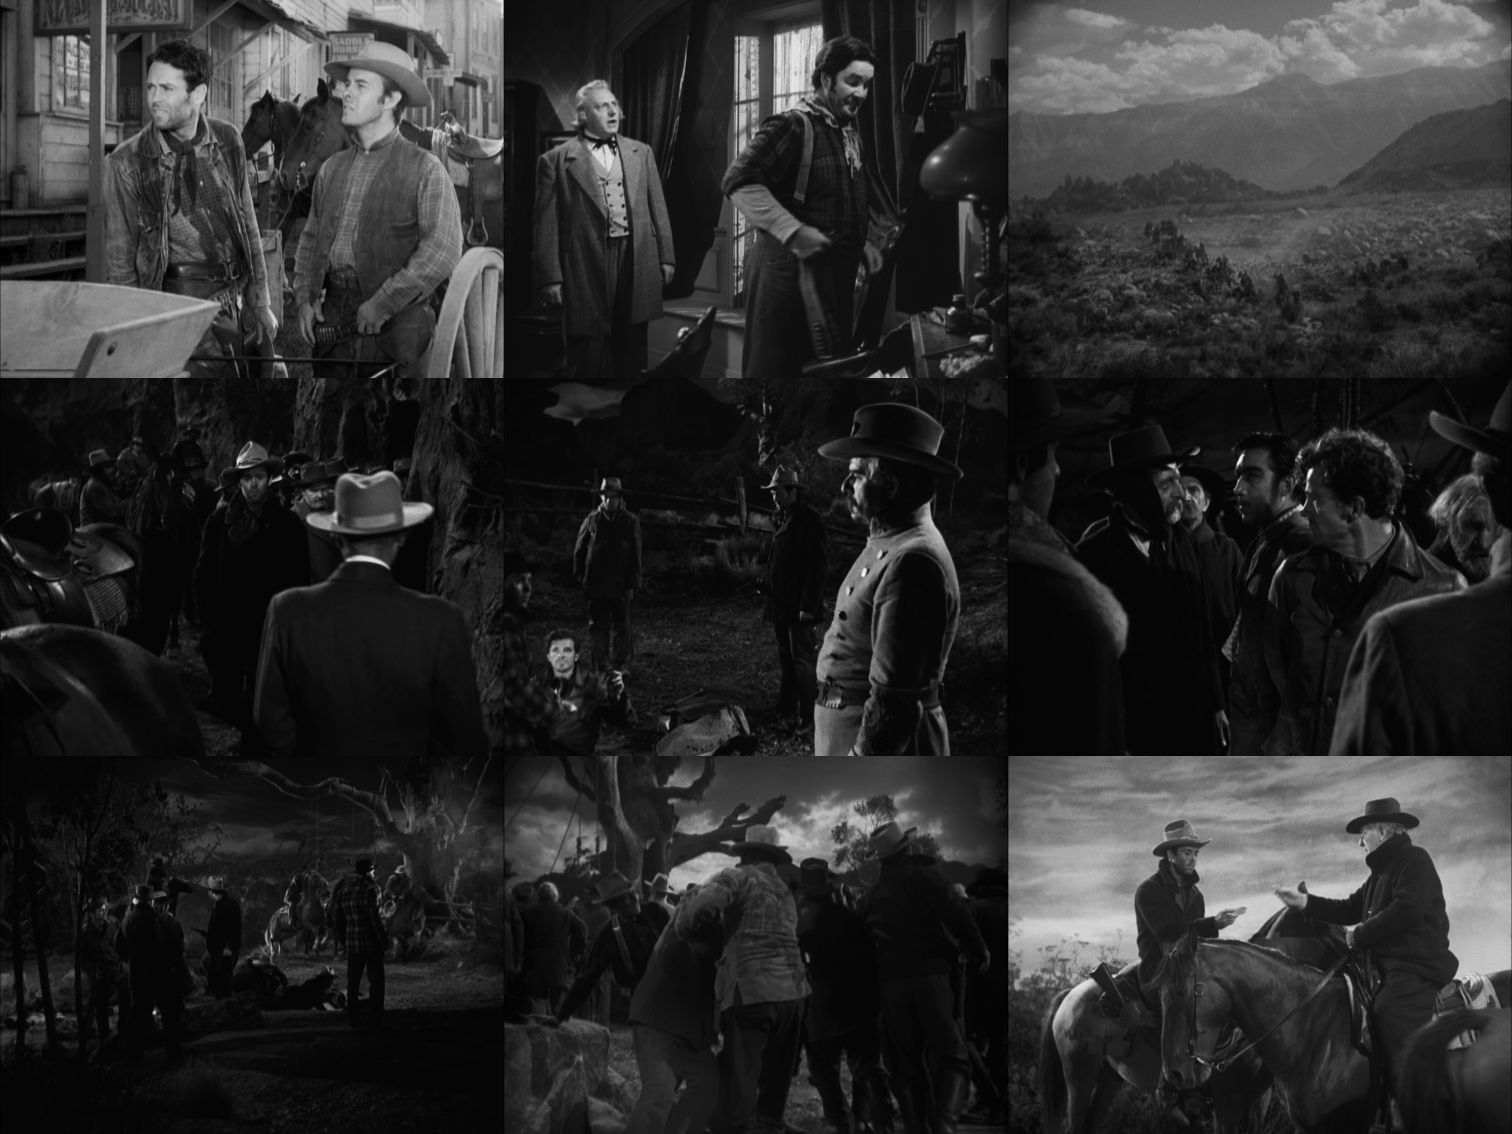 ţҰ/Ƿ The.Ox-Bow.Incident.1943.REMASTERED.1080p.BluRay.X264-AMIABLE 7.66GB-2.png